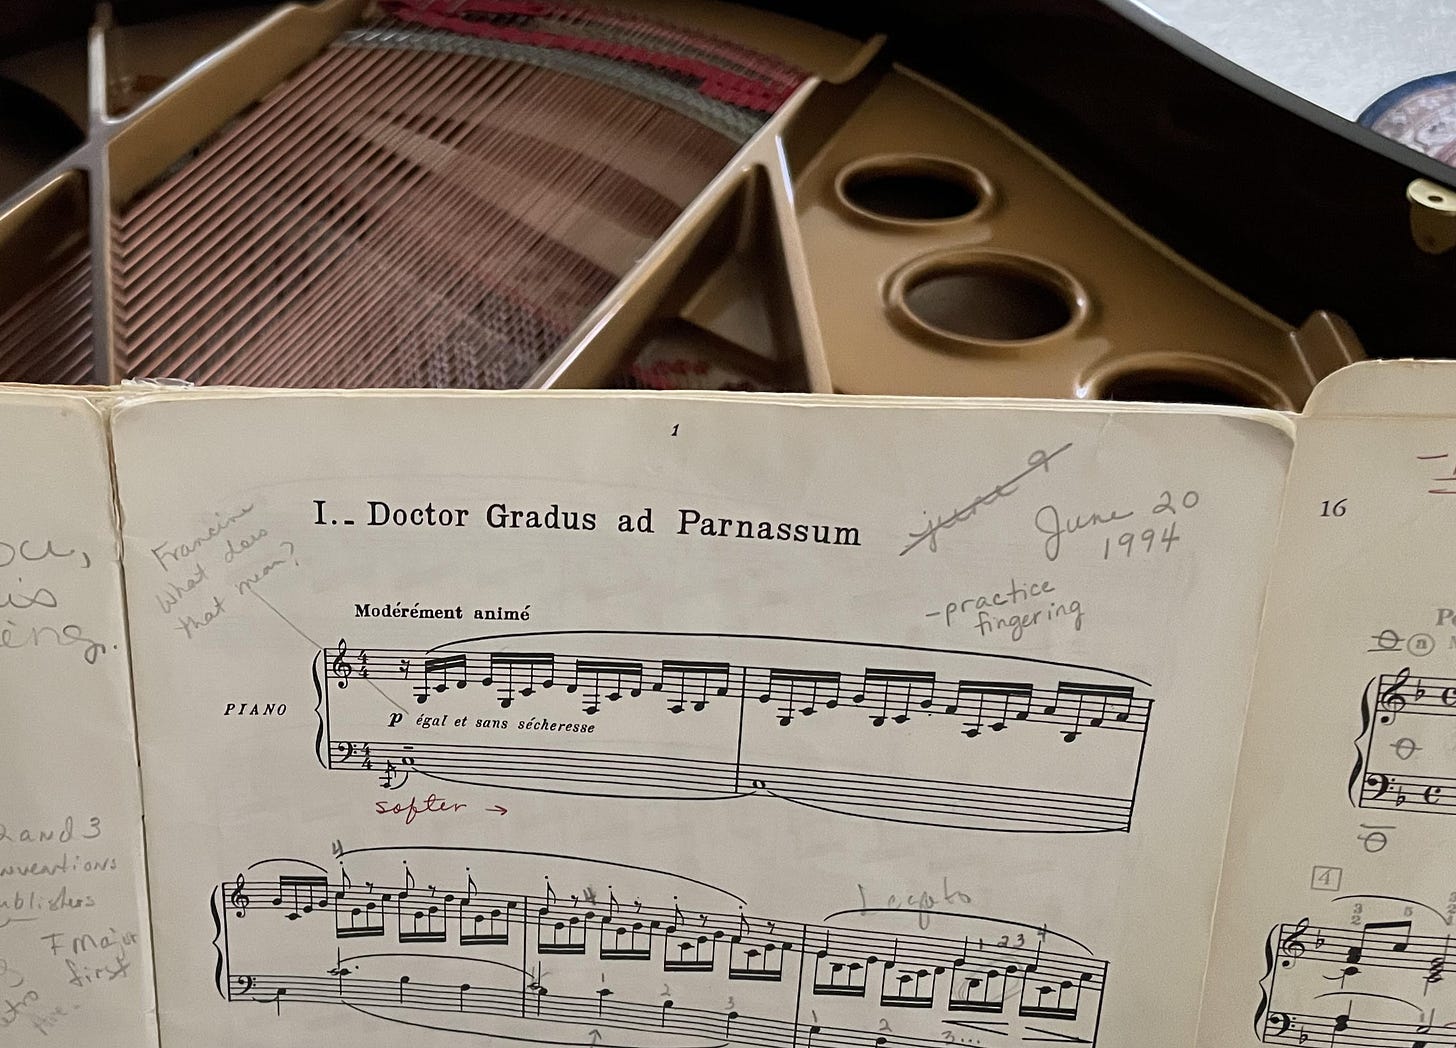 Music for Doctor Gradus sitting on a grand piano